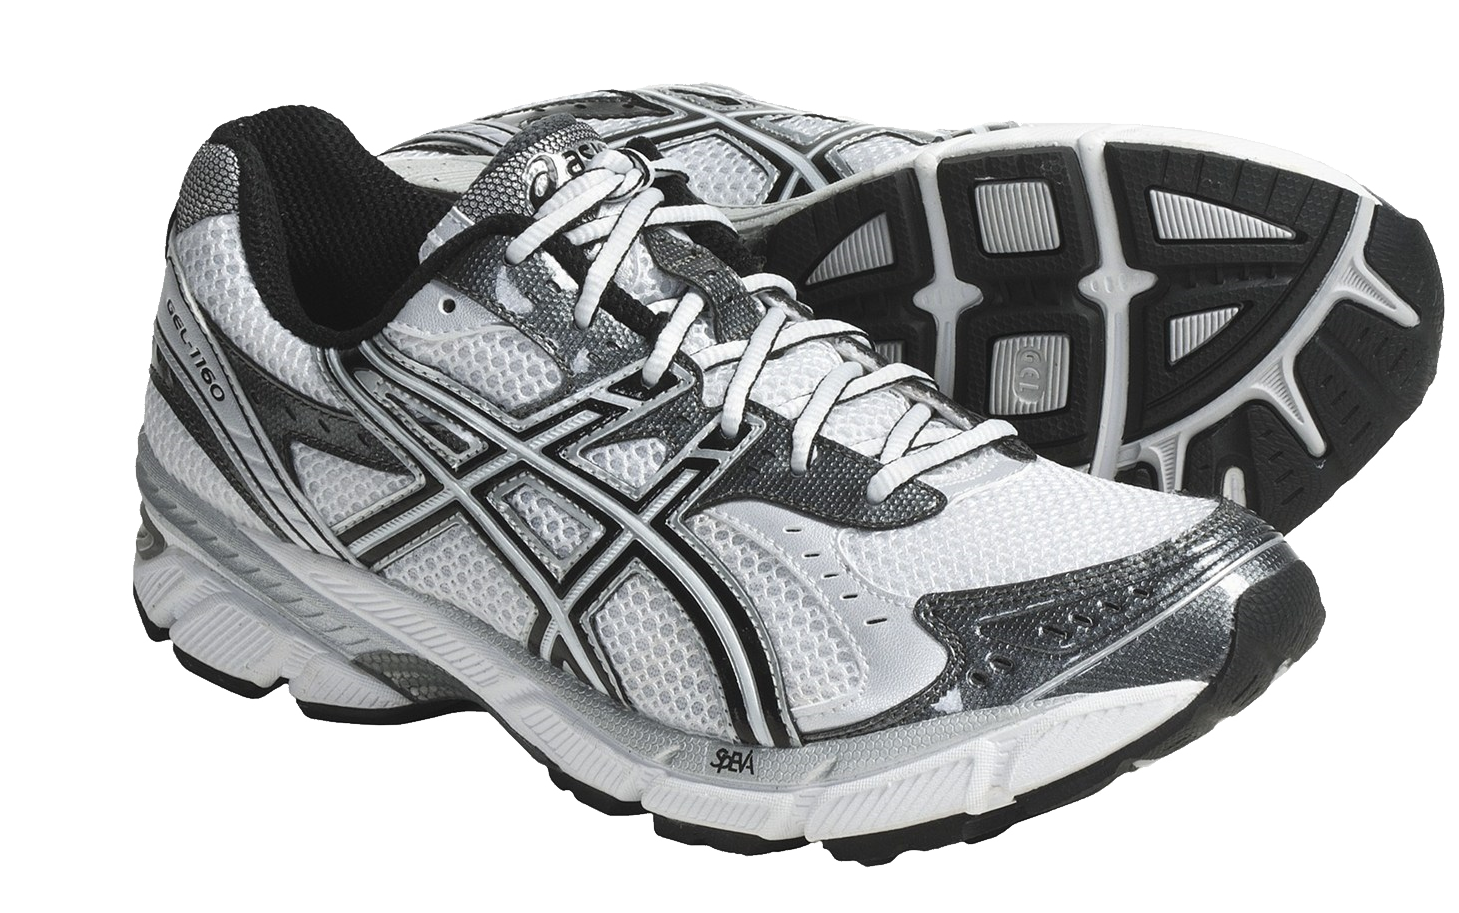 Running Shoes Png Image - Running Shoes, Transparent background PNG HD thumbnail